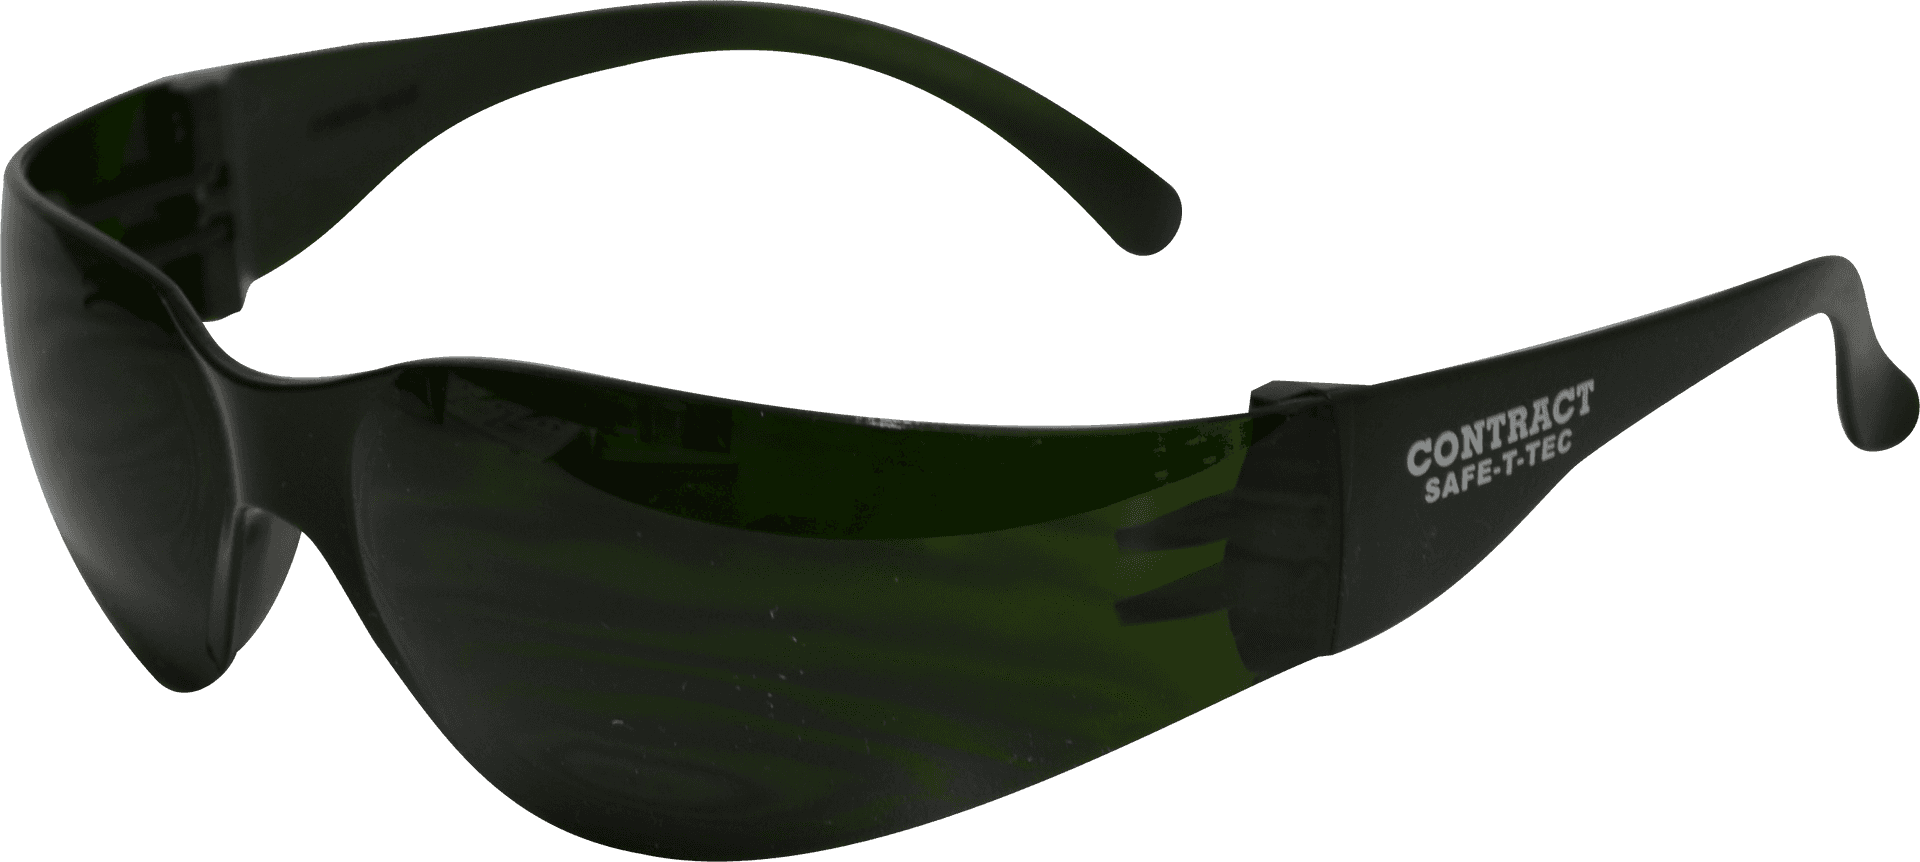 Black Safety Goggles Contract Safe Tec PNG